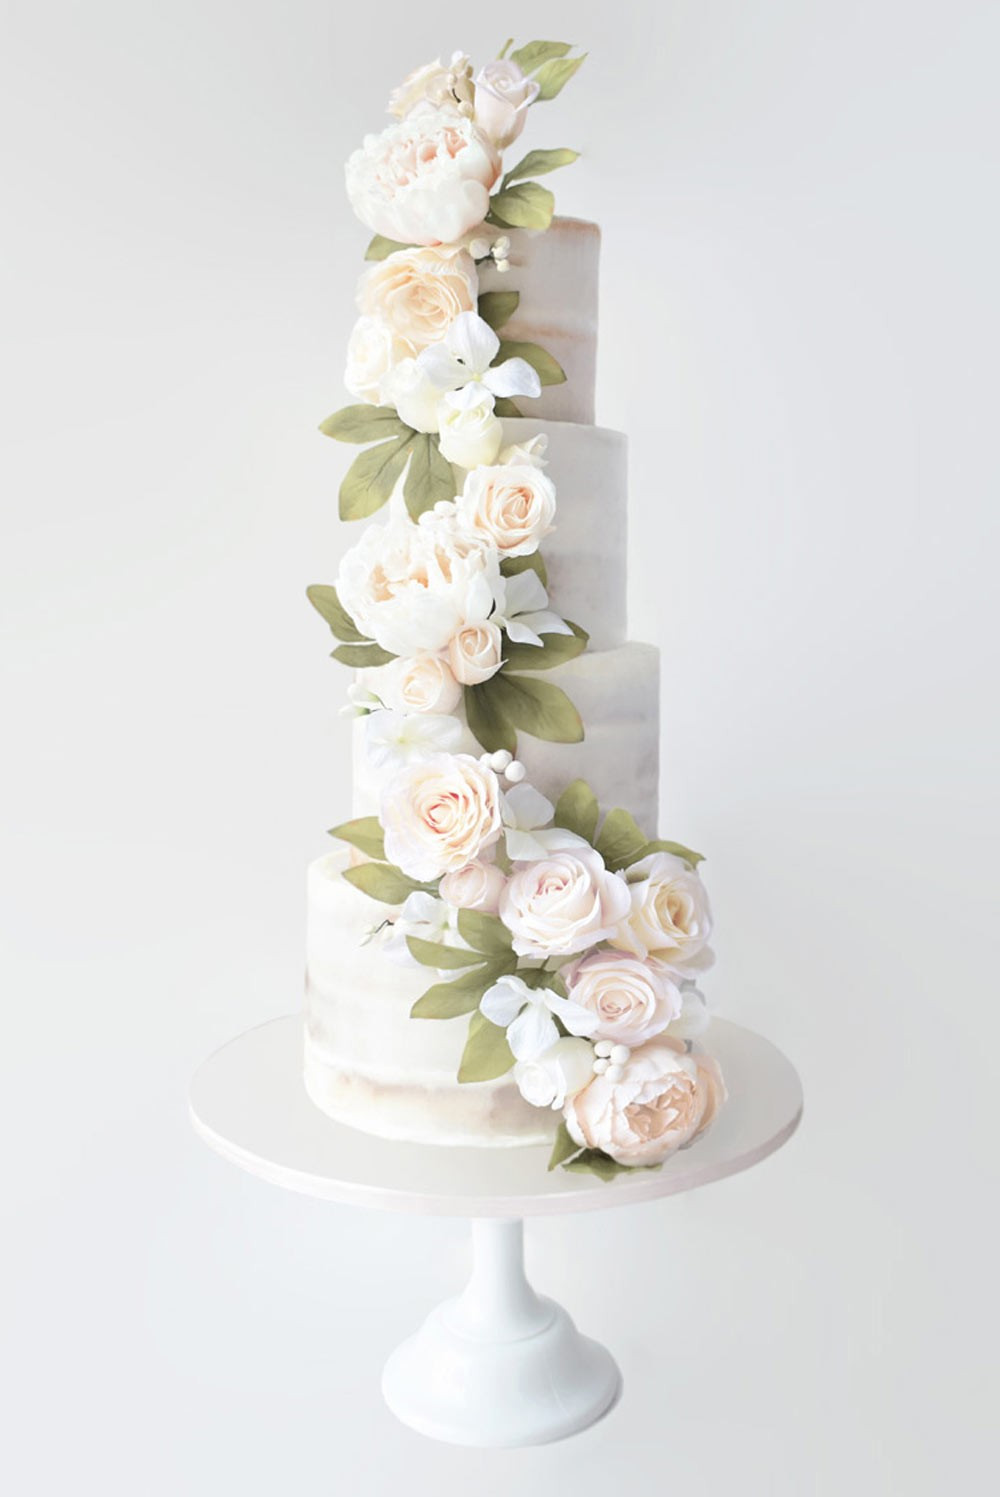 Wedding Cake Price
 Wedding Cake Prices Guide for bud s from £100 to over £